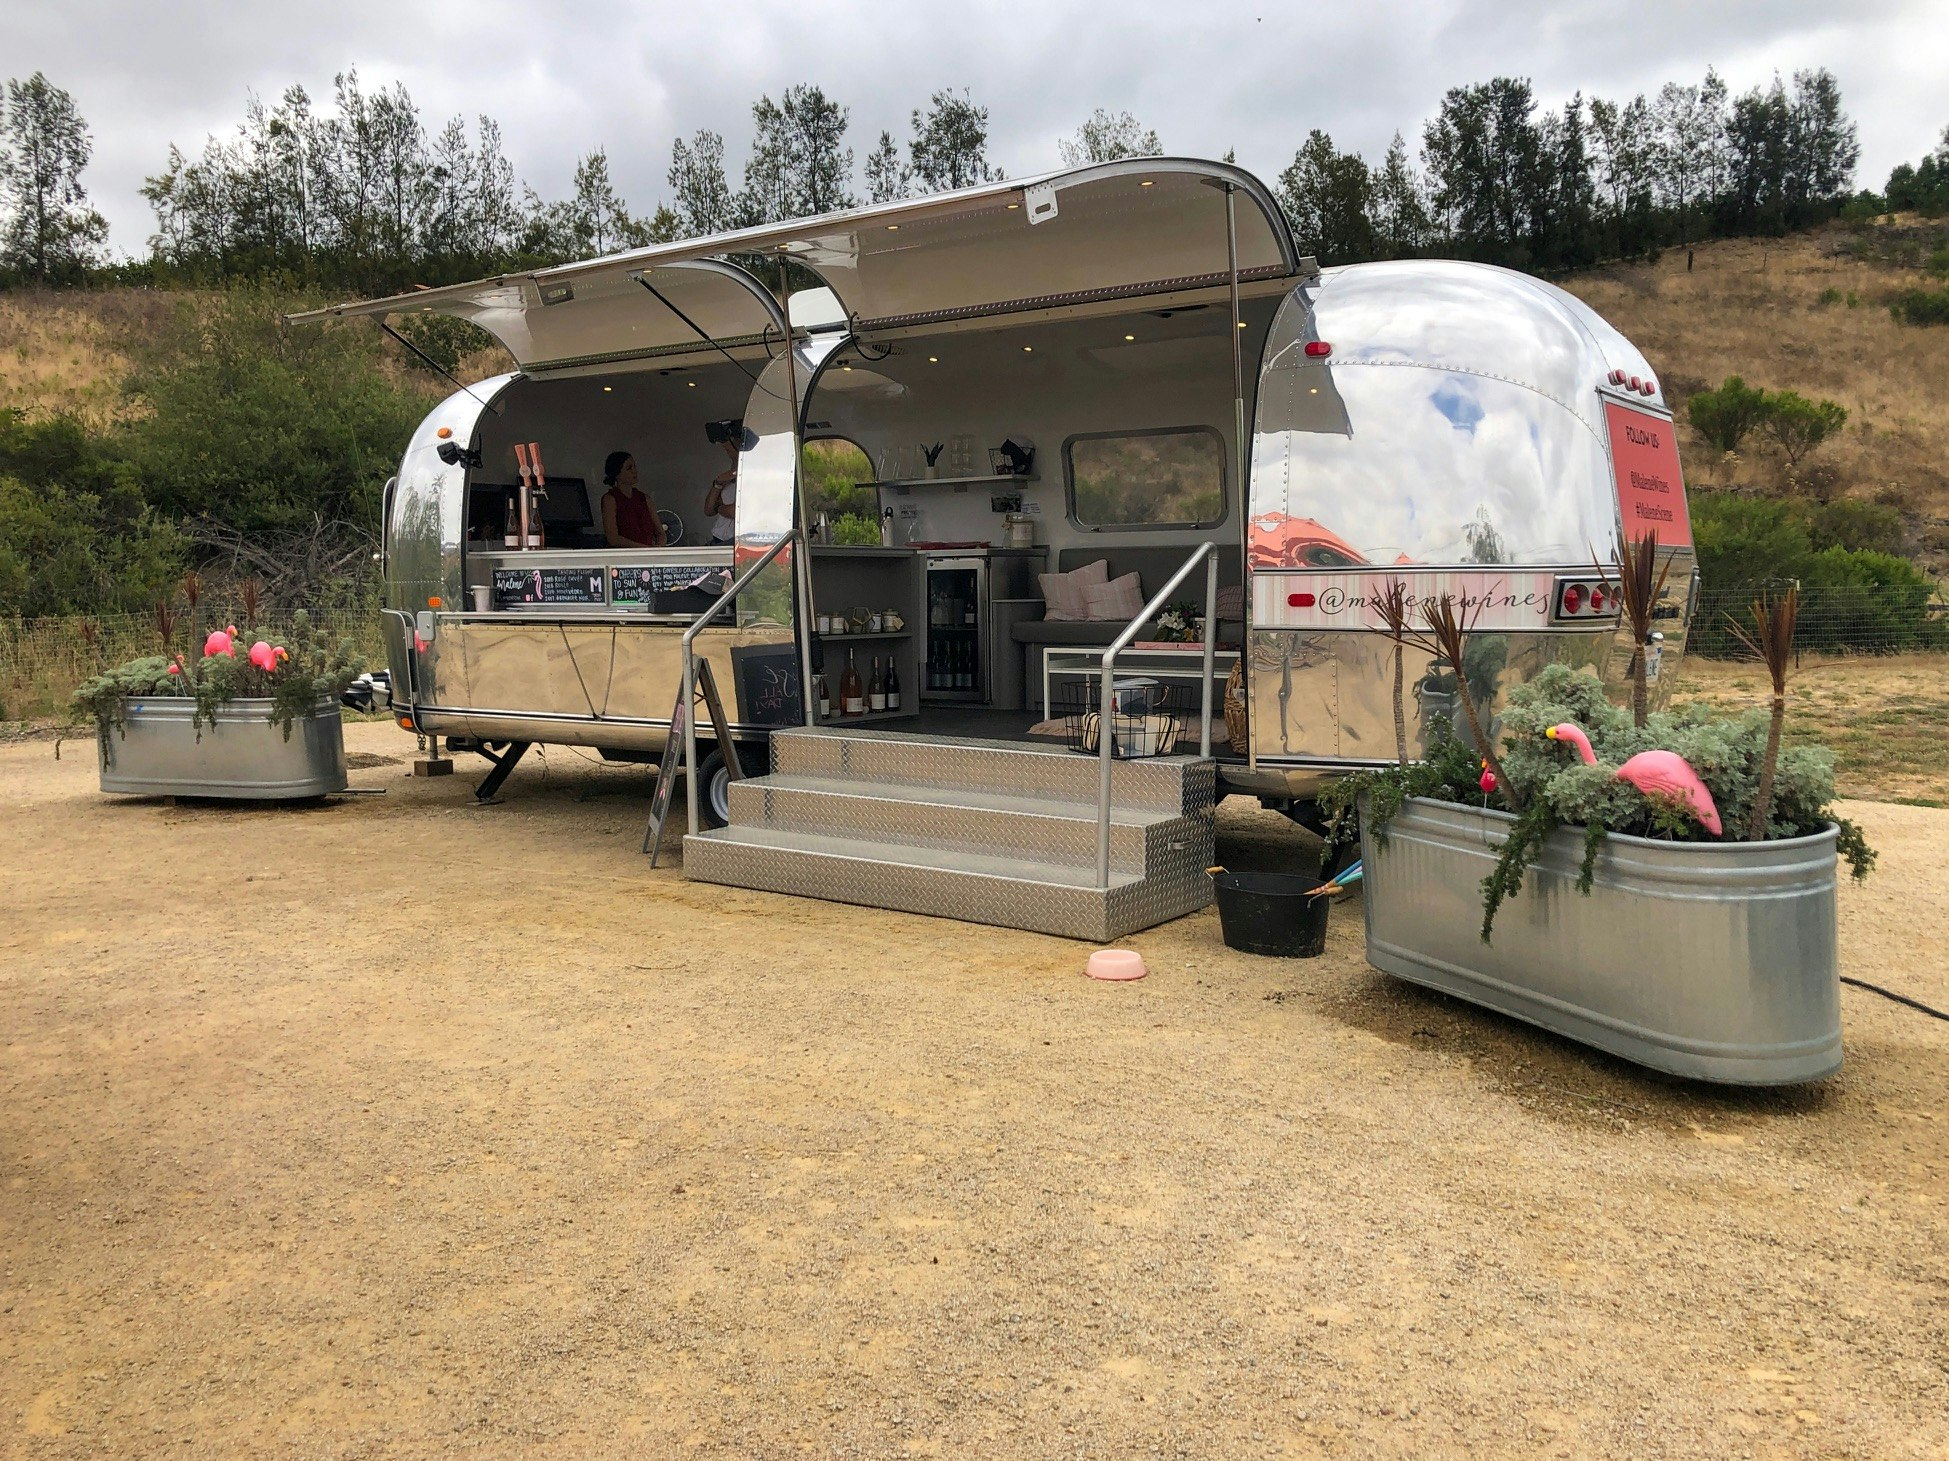 An airstream trailer that's been converted into an open tasting room.